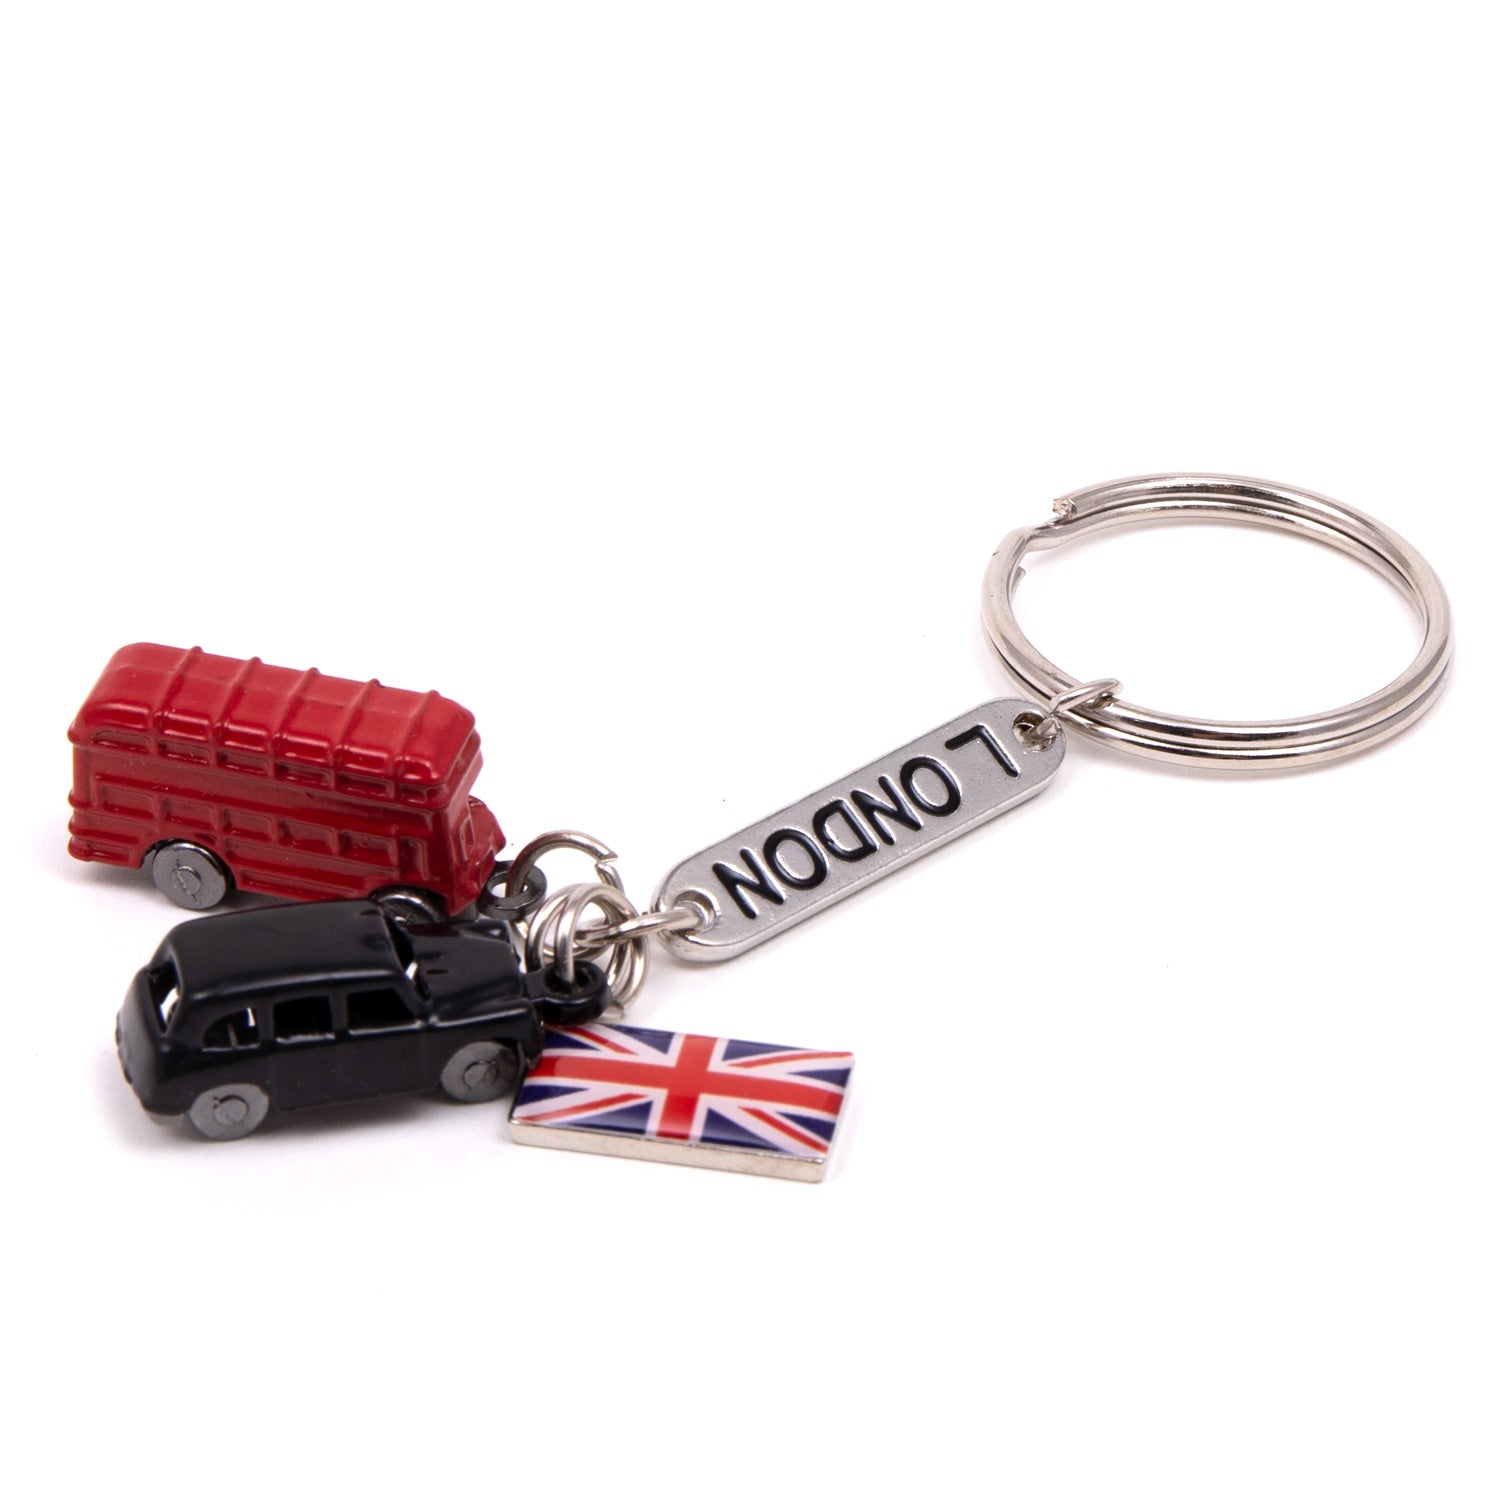 London Bus, Black Taxi and Union Jack Die Cast Keyring 1